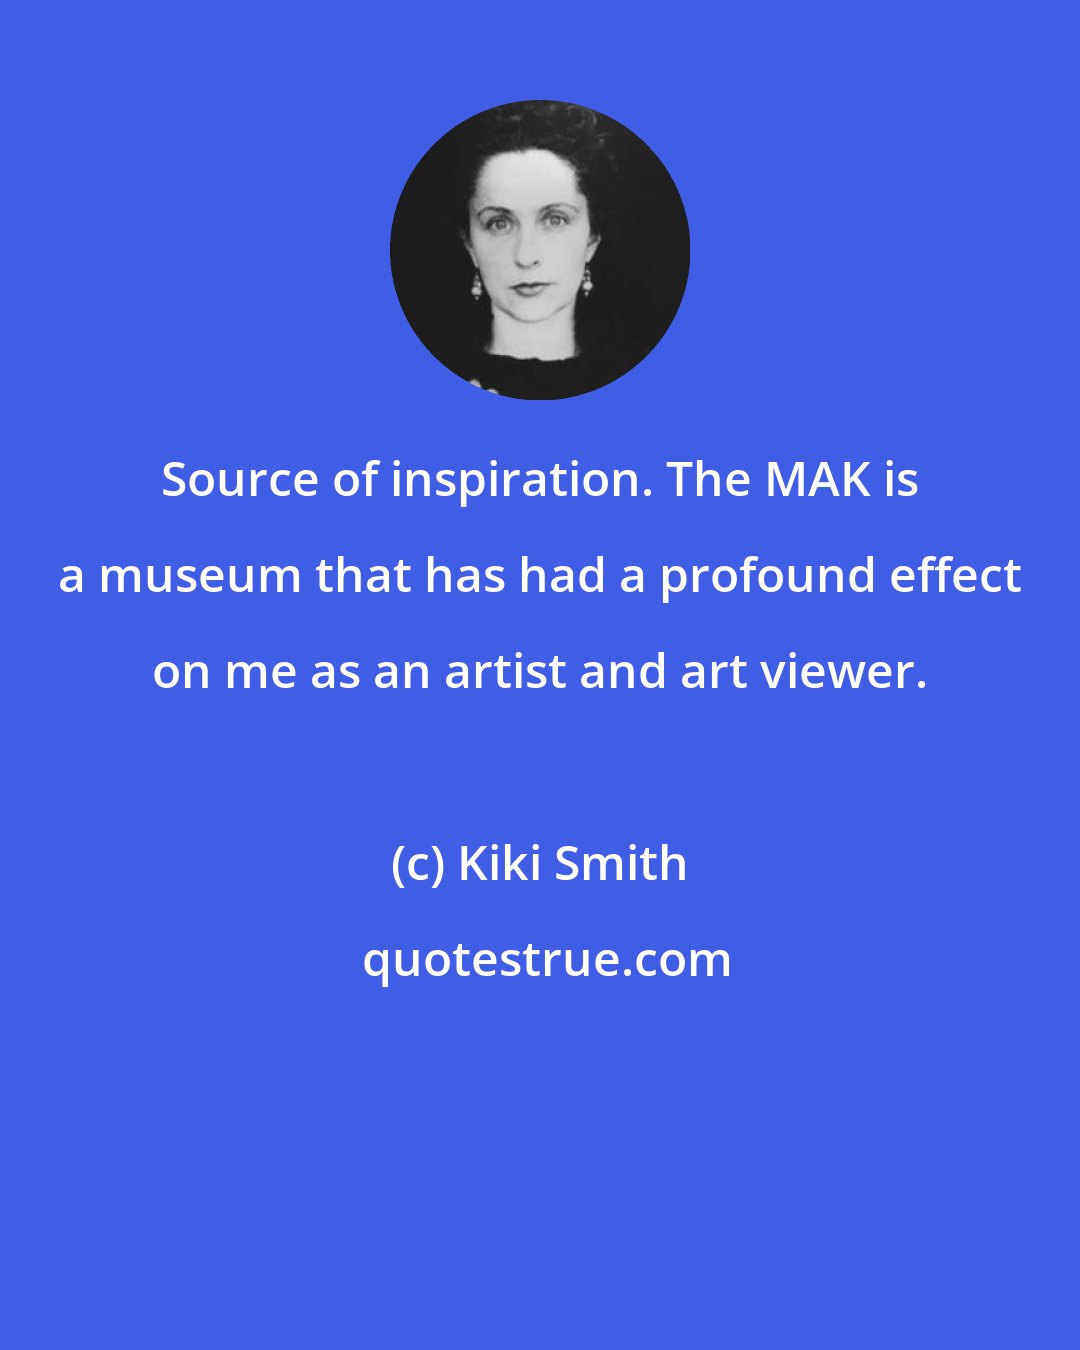 Kiki Smith: Source of inspiration. The MAK is a museum that has had a profound effect on me as an artist and art viewer.